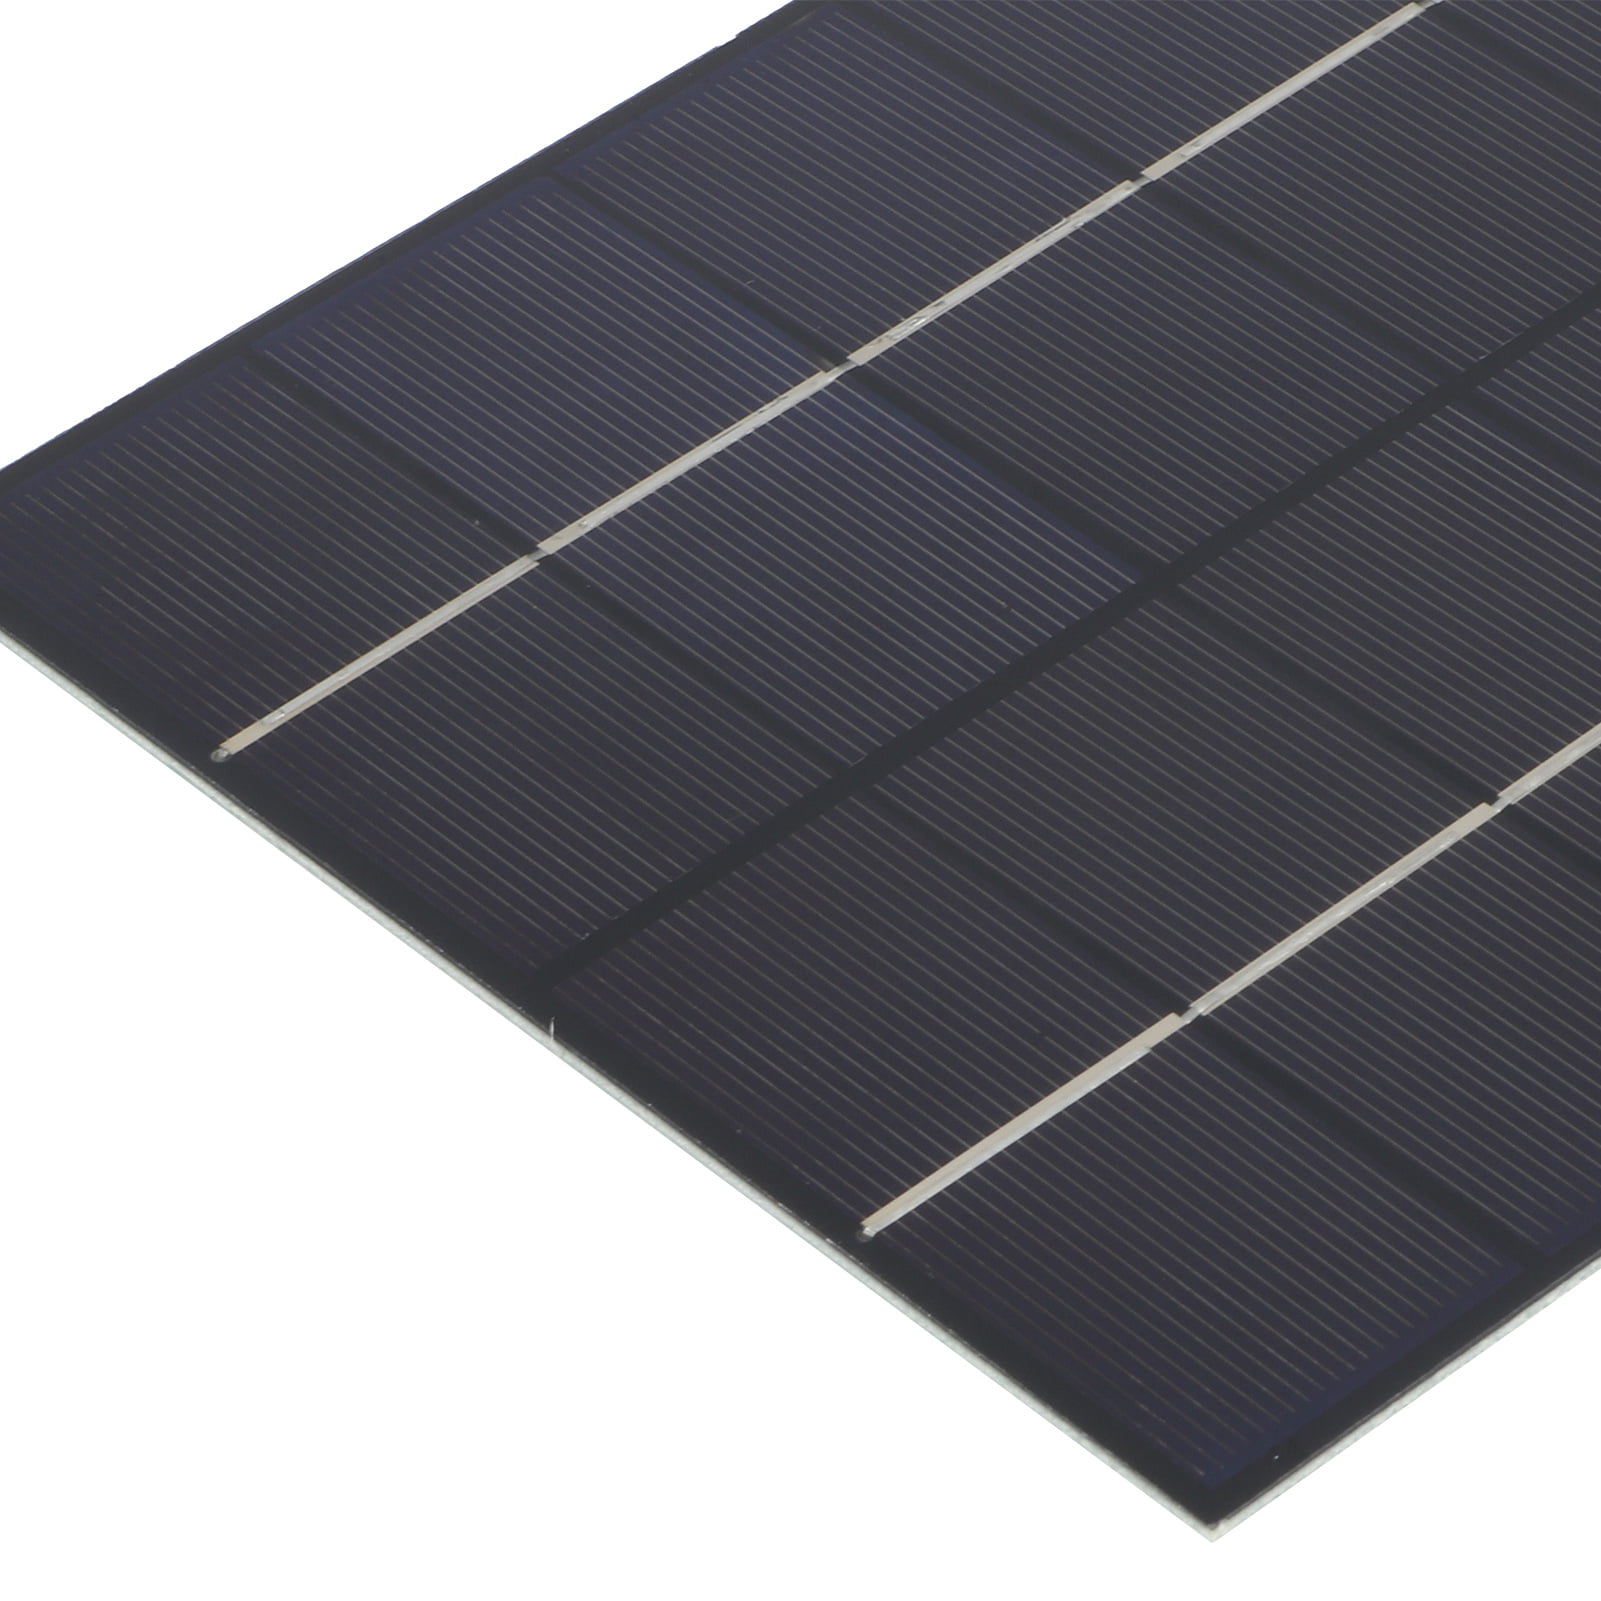 Solar Panel Module Solar Charger Panel Durable 2W 6V Mini Monocrystalline Silicon Camping Use for Solar Lights Solar Toys Outdoor Use